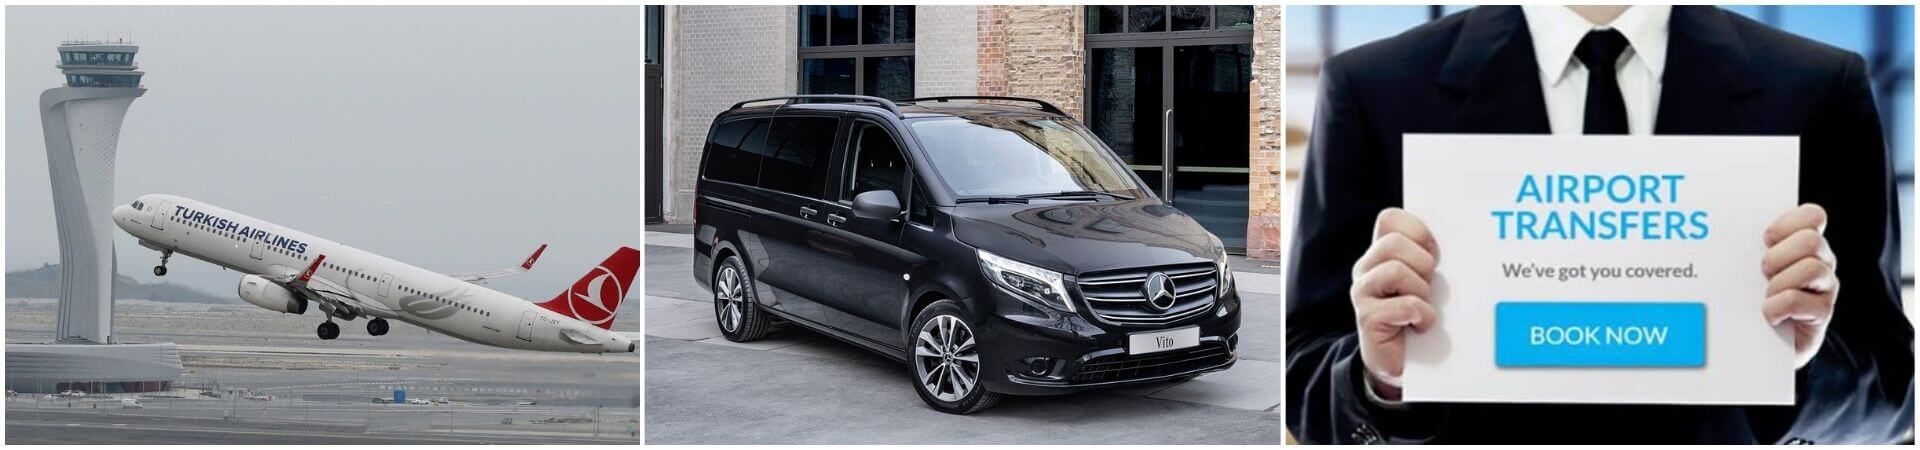 Istanbul Airport Private Transfer (Discounted)